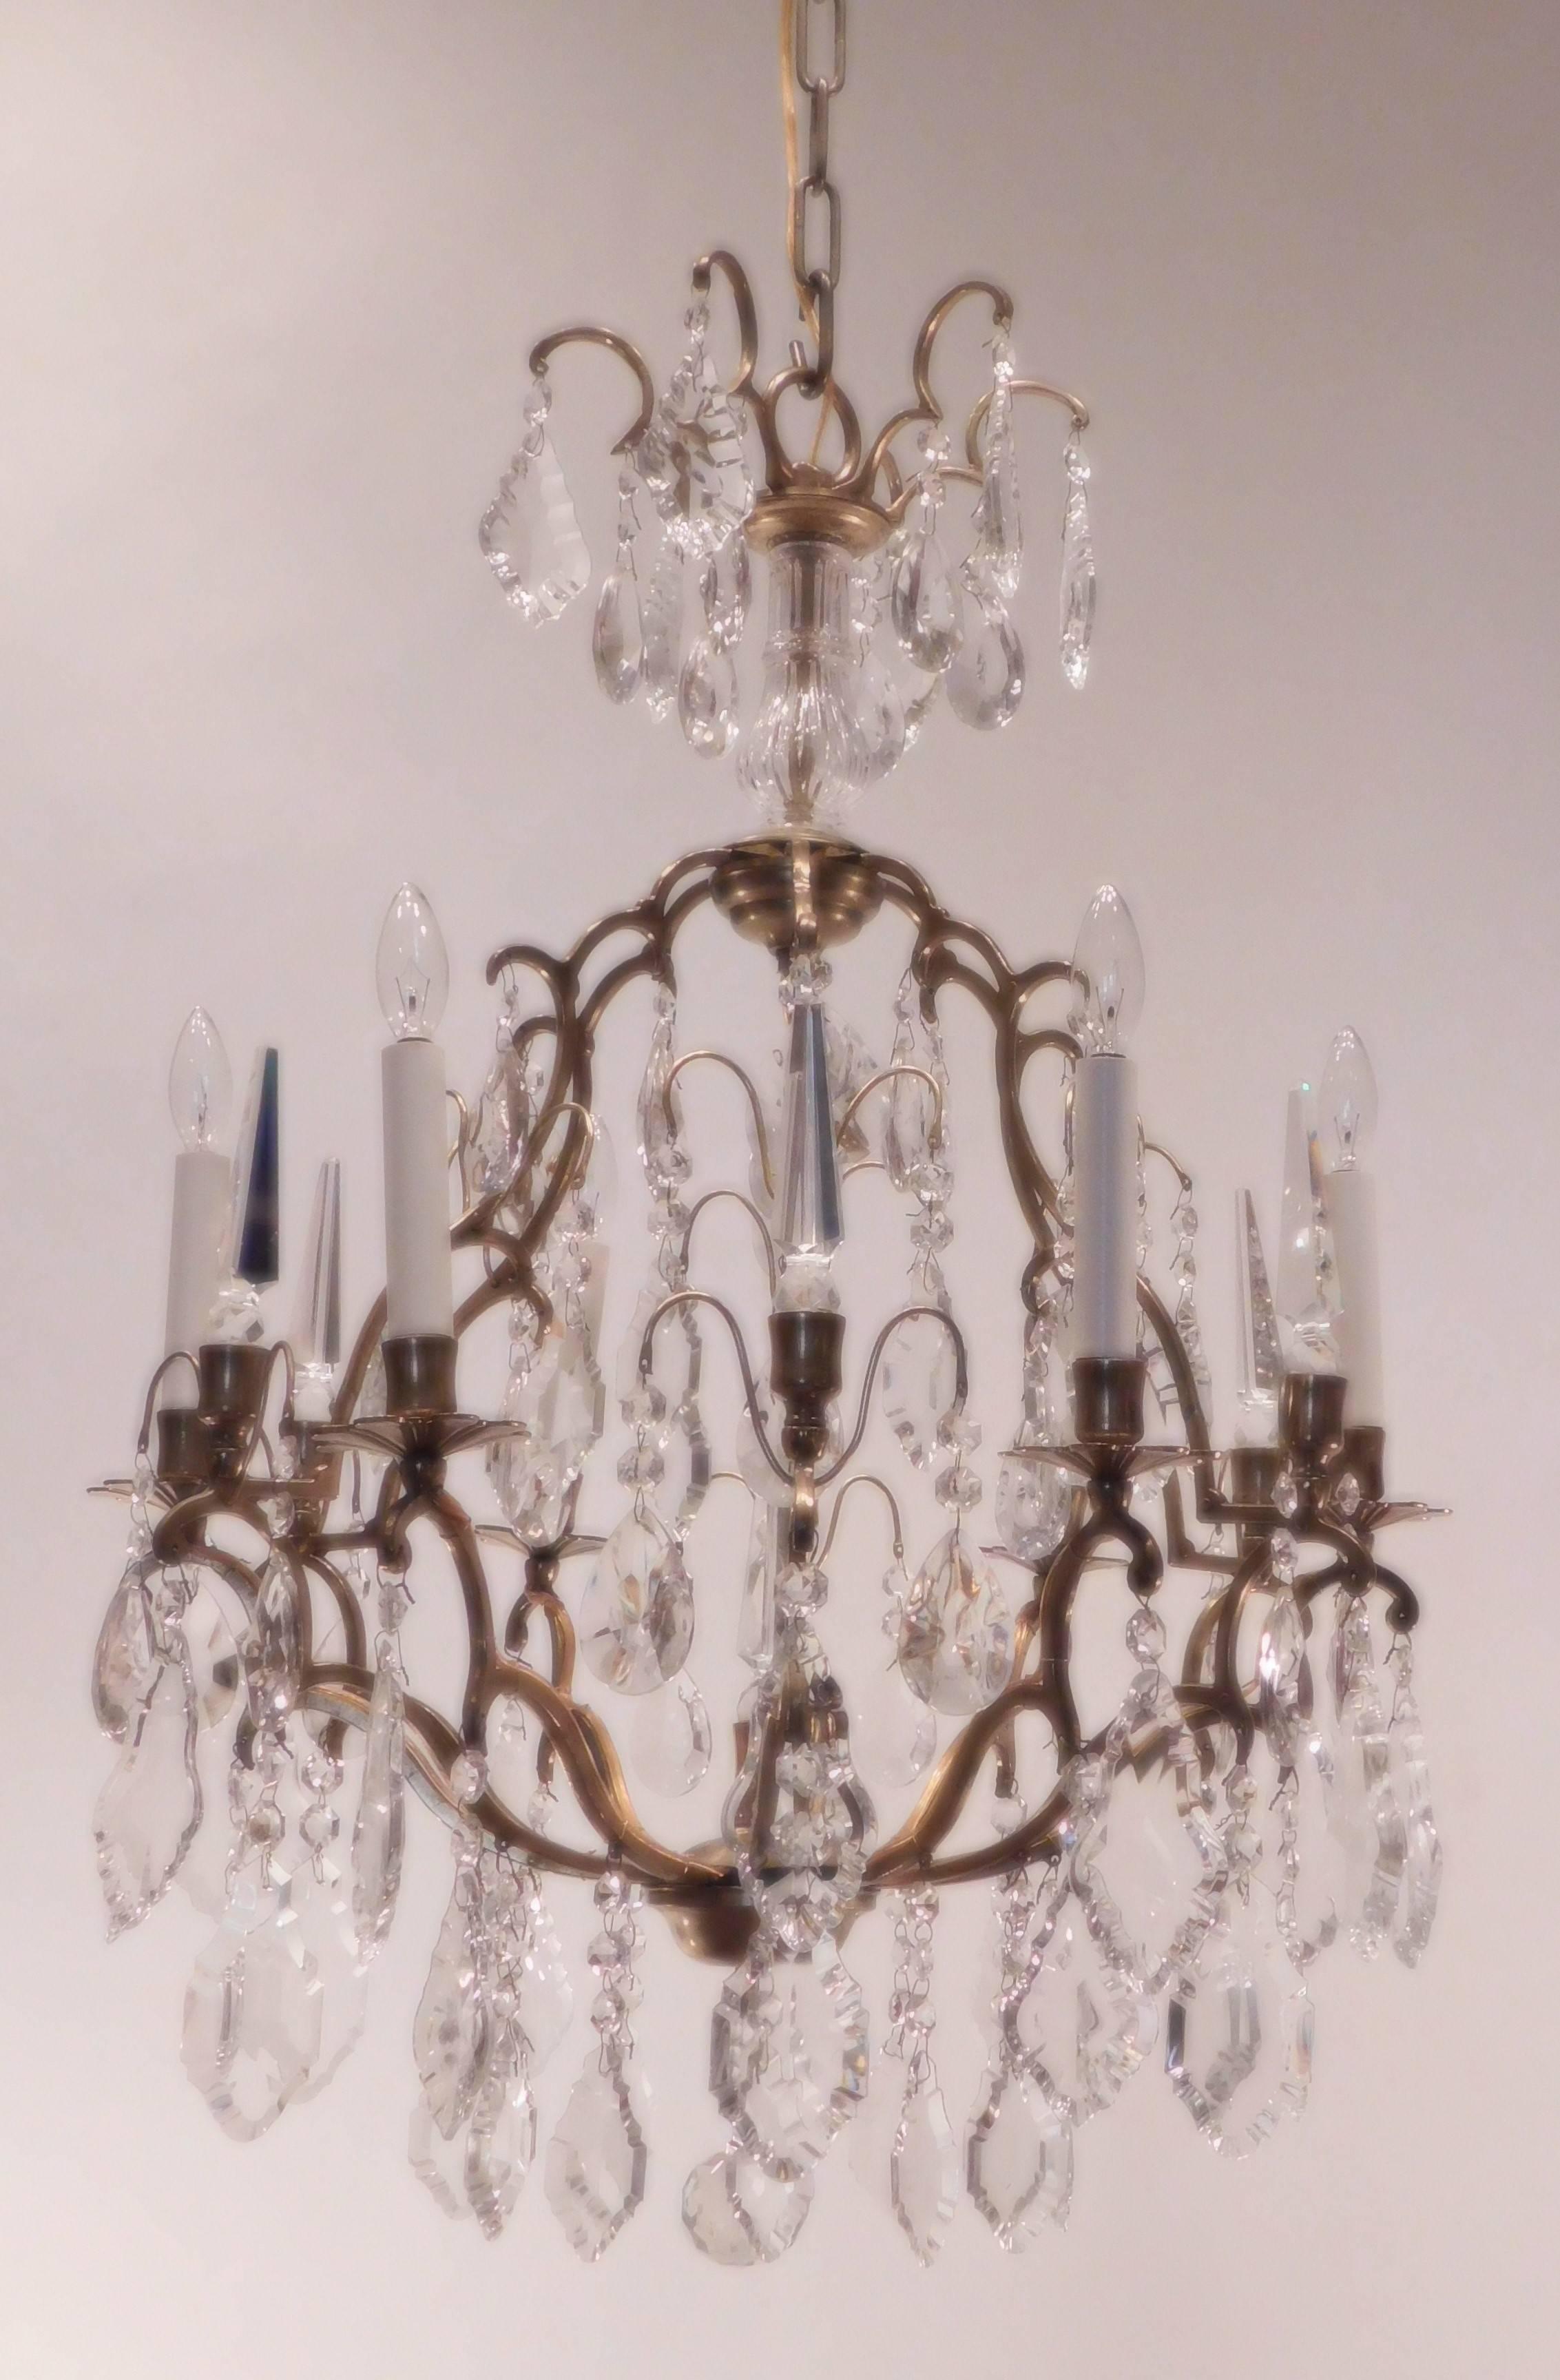 Brass frame with lead crystal spikes, florets and Baccarat cut prisms. Hanging hardware, chain and ceiling cap included.